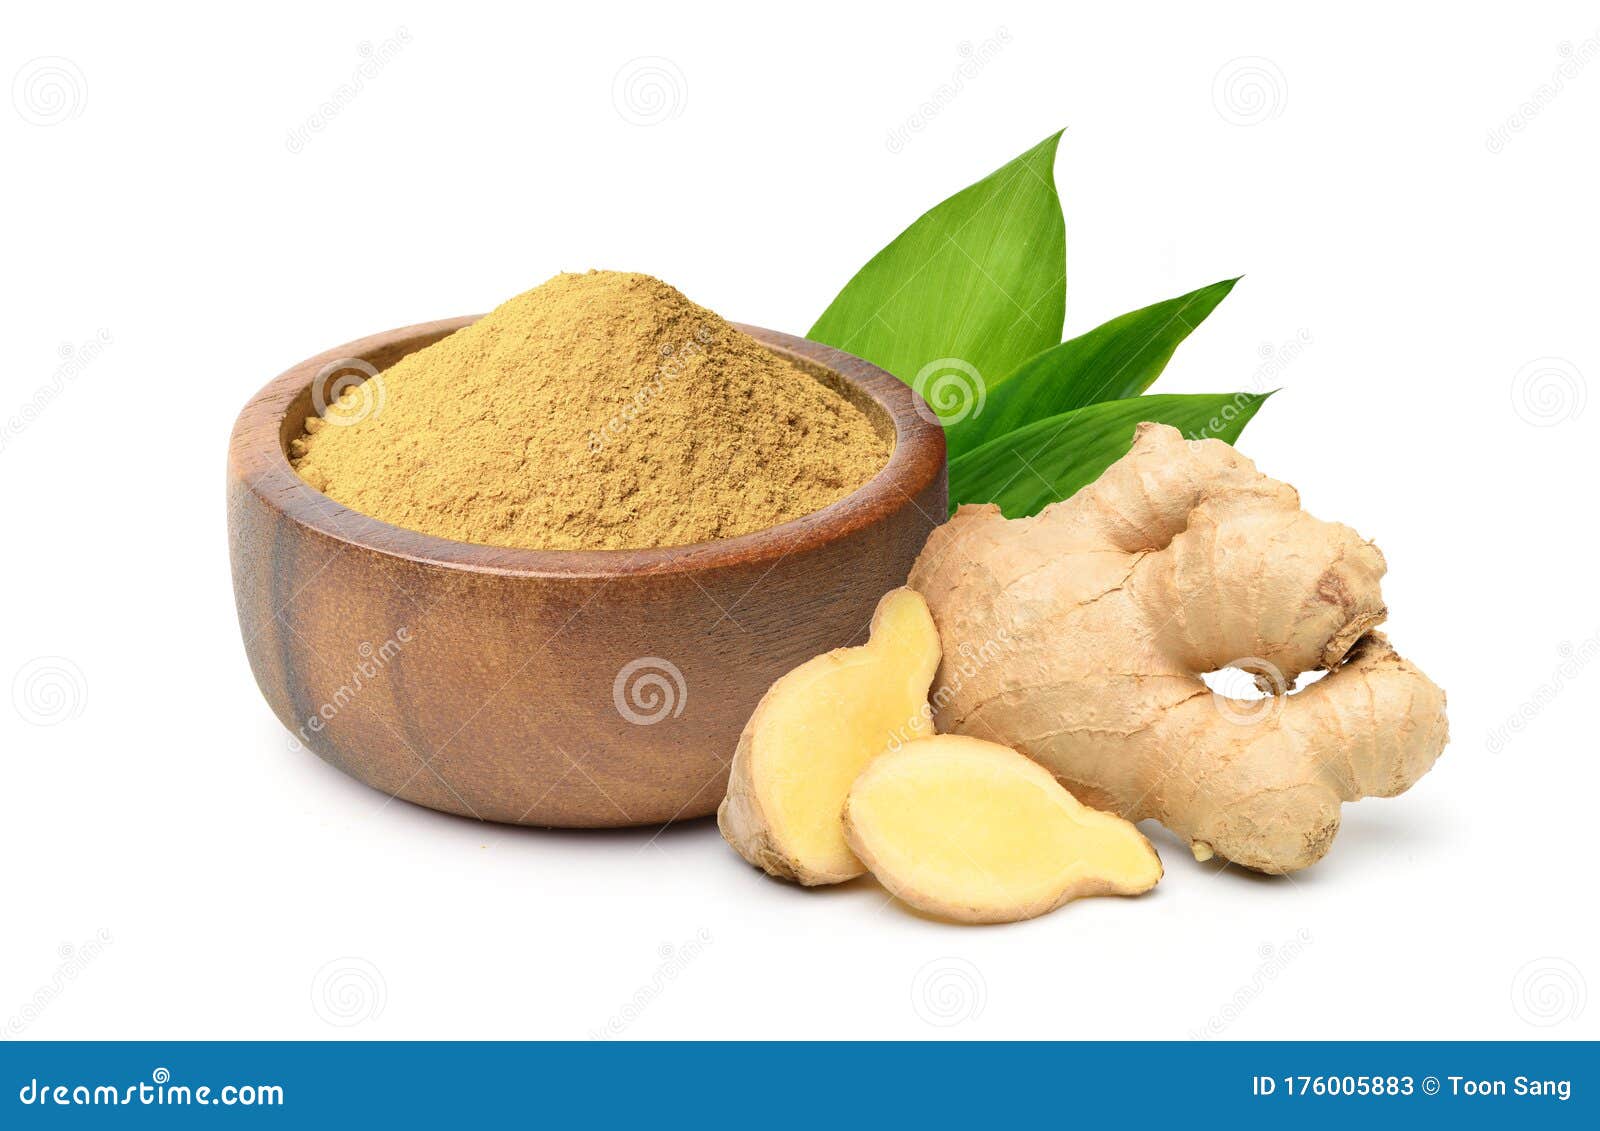 finely dry ginger powder in wooden bowl